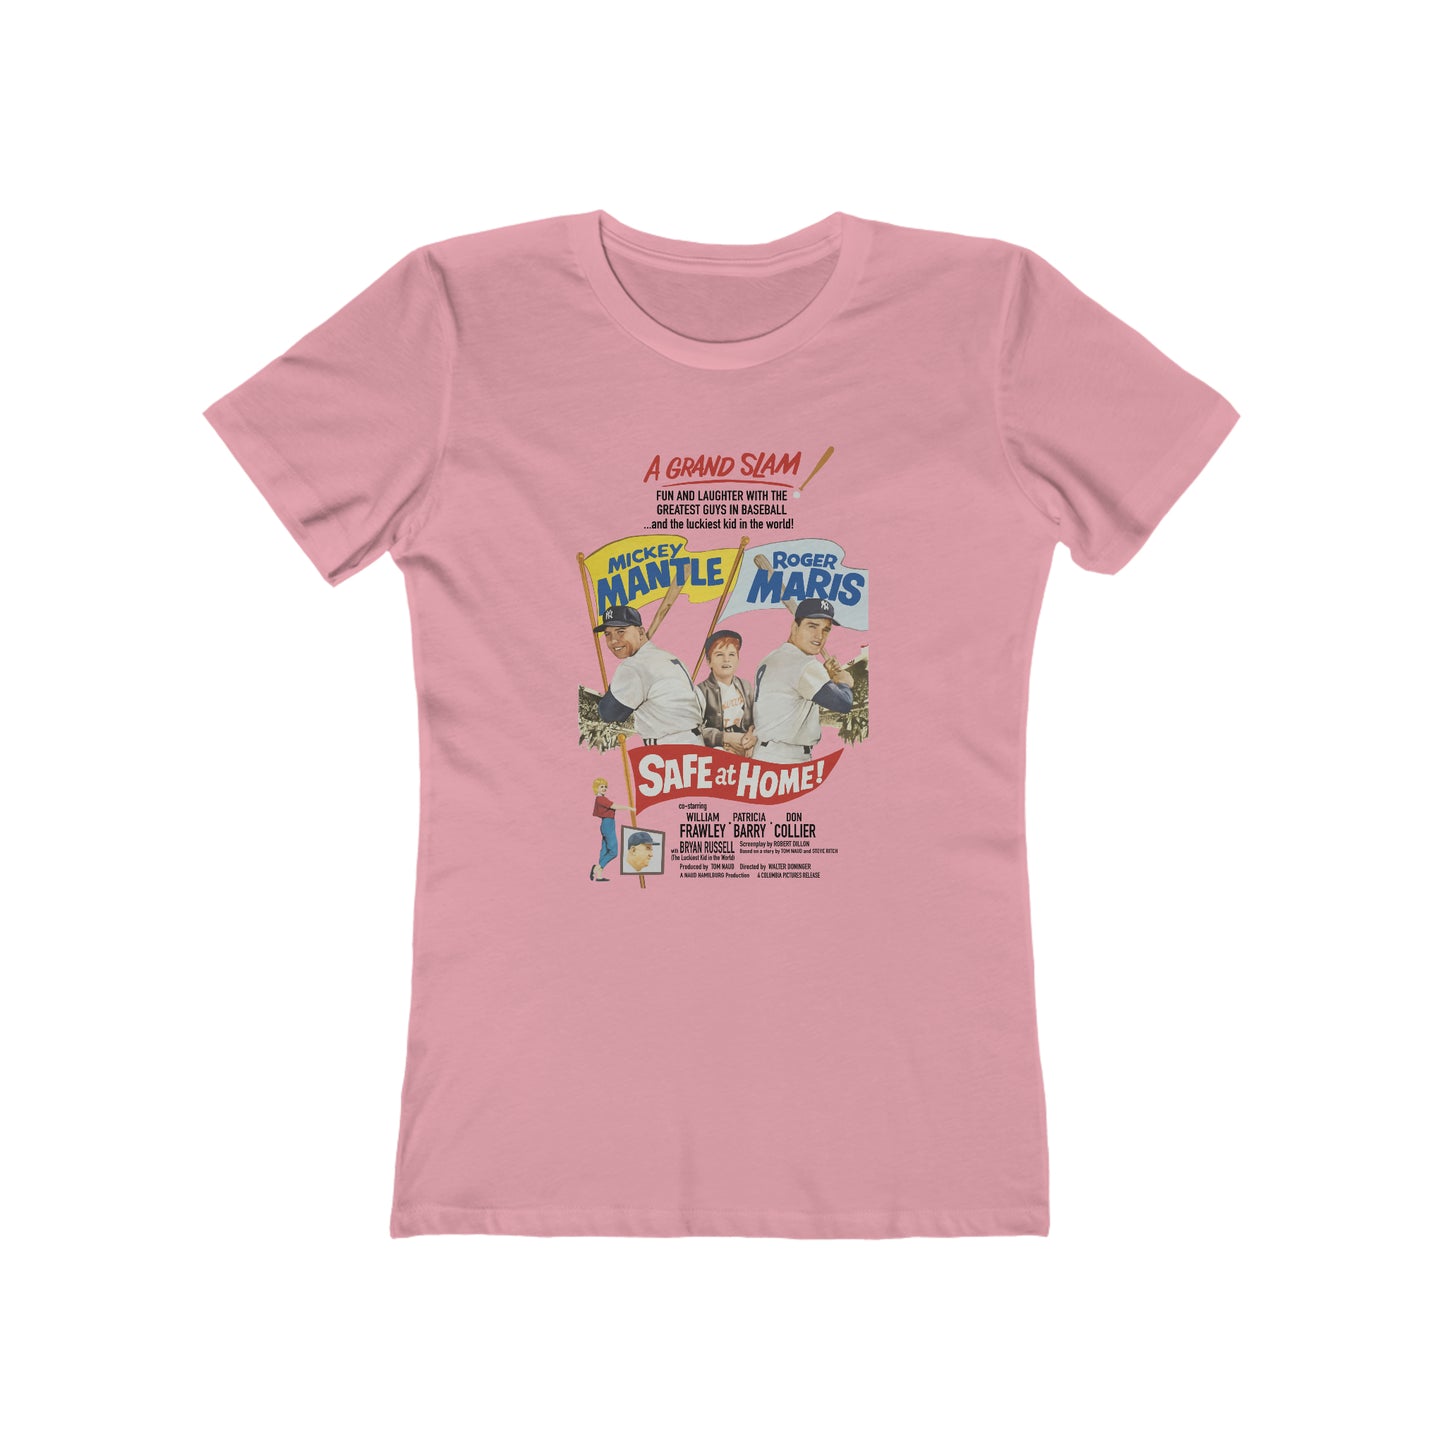 Mantle & Maris in Safe at Home - Women's T-Shirt